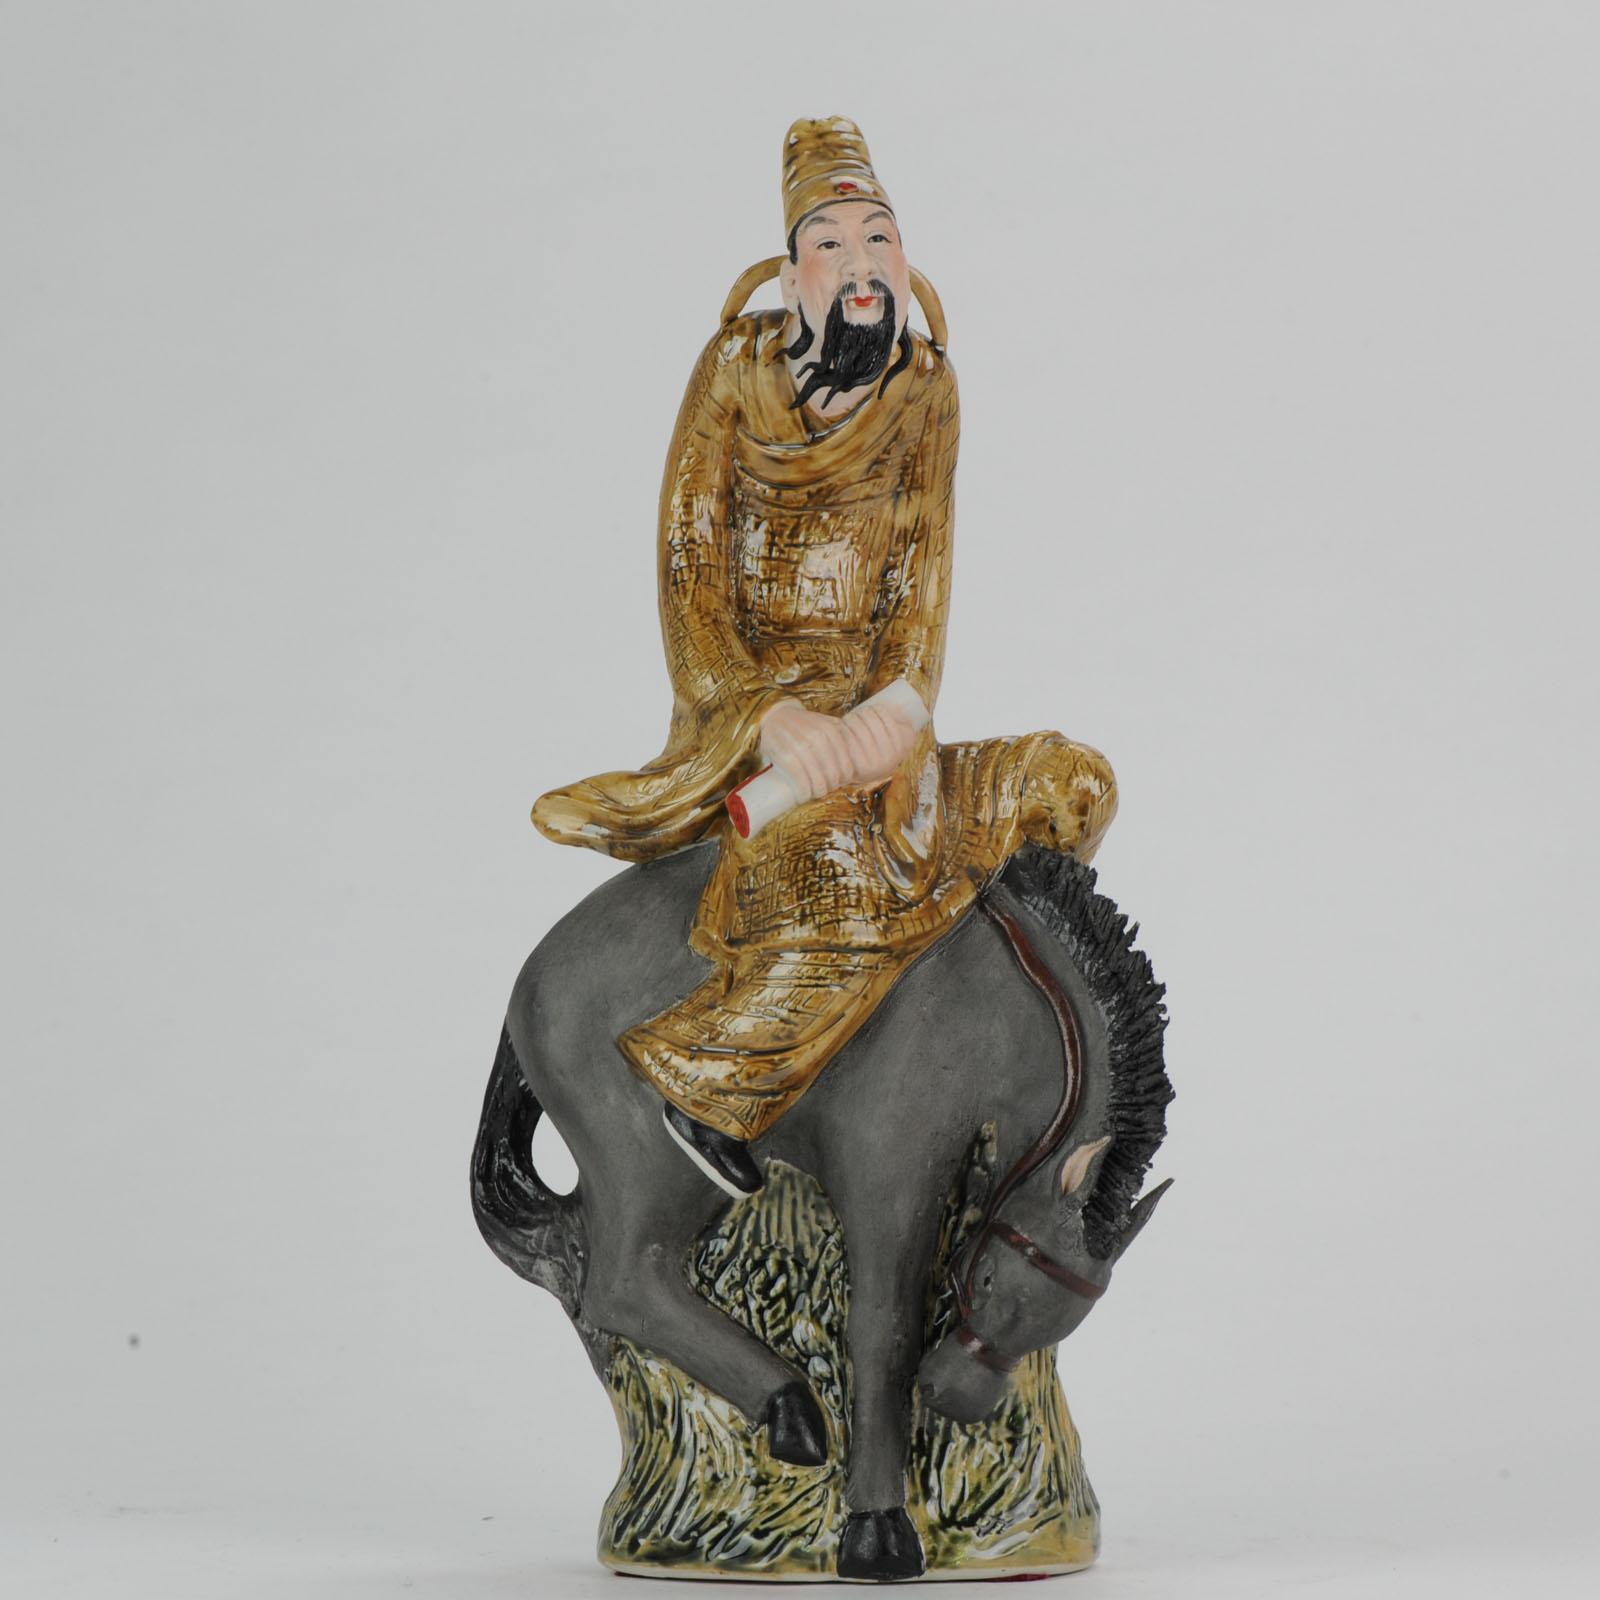 Porcelain Chinese porcelain sculpture Man on Horse, Dated 1998, Created by Xu Jian Jian For Sale